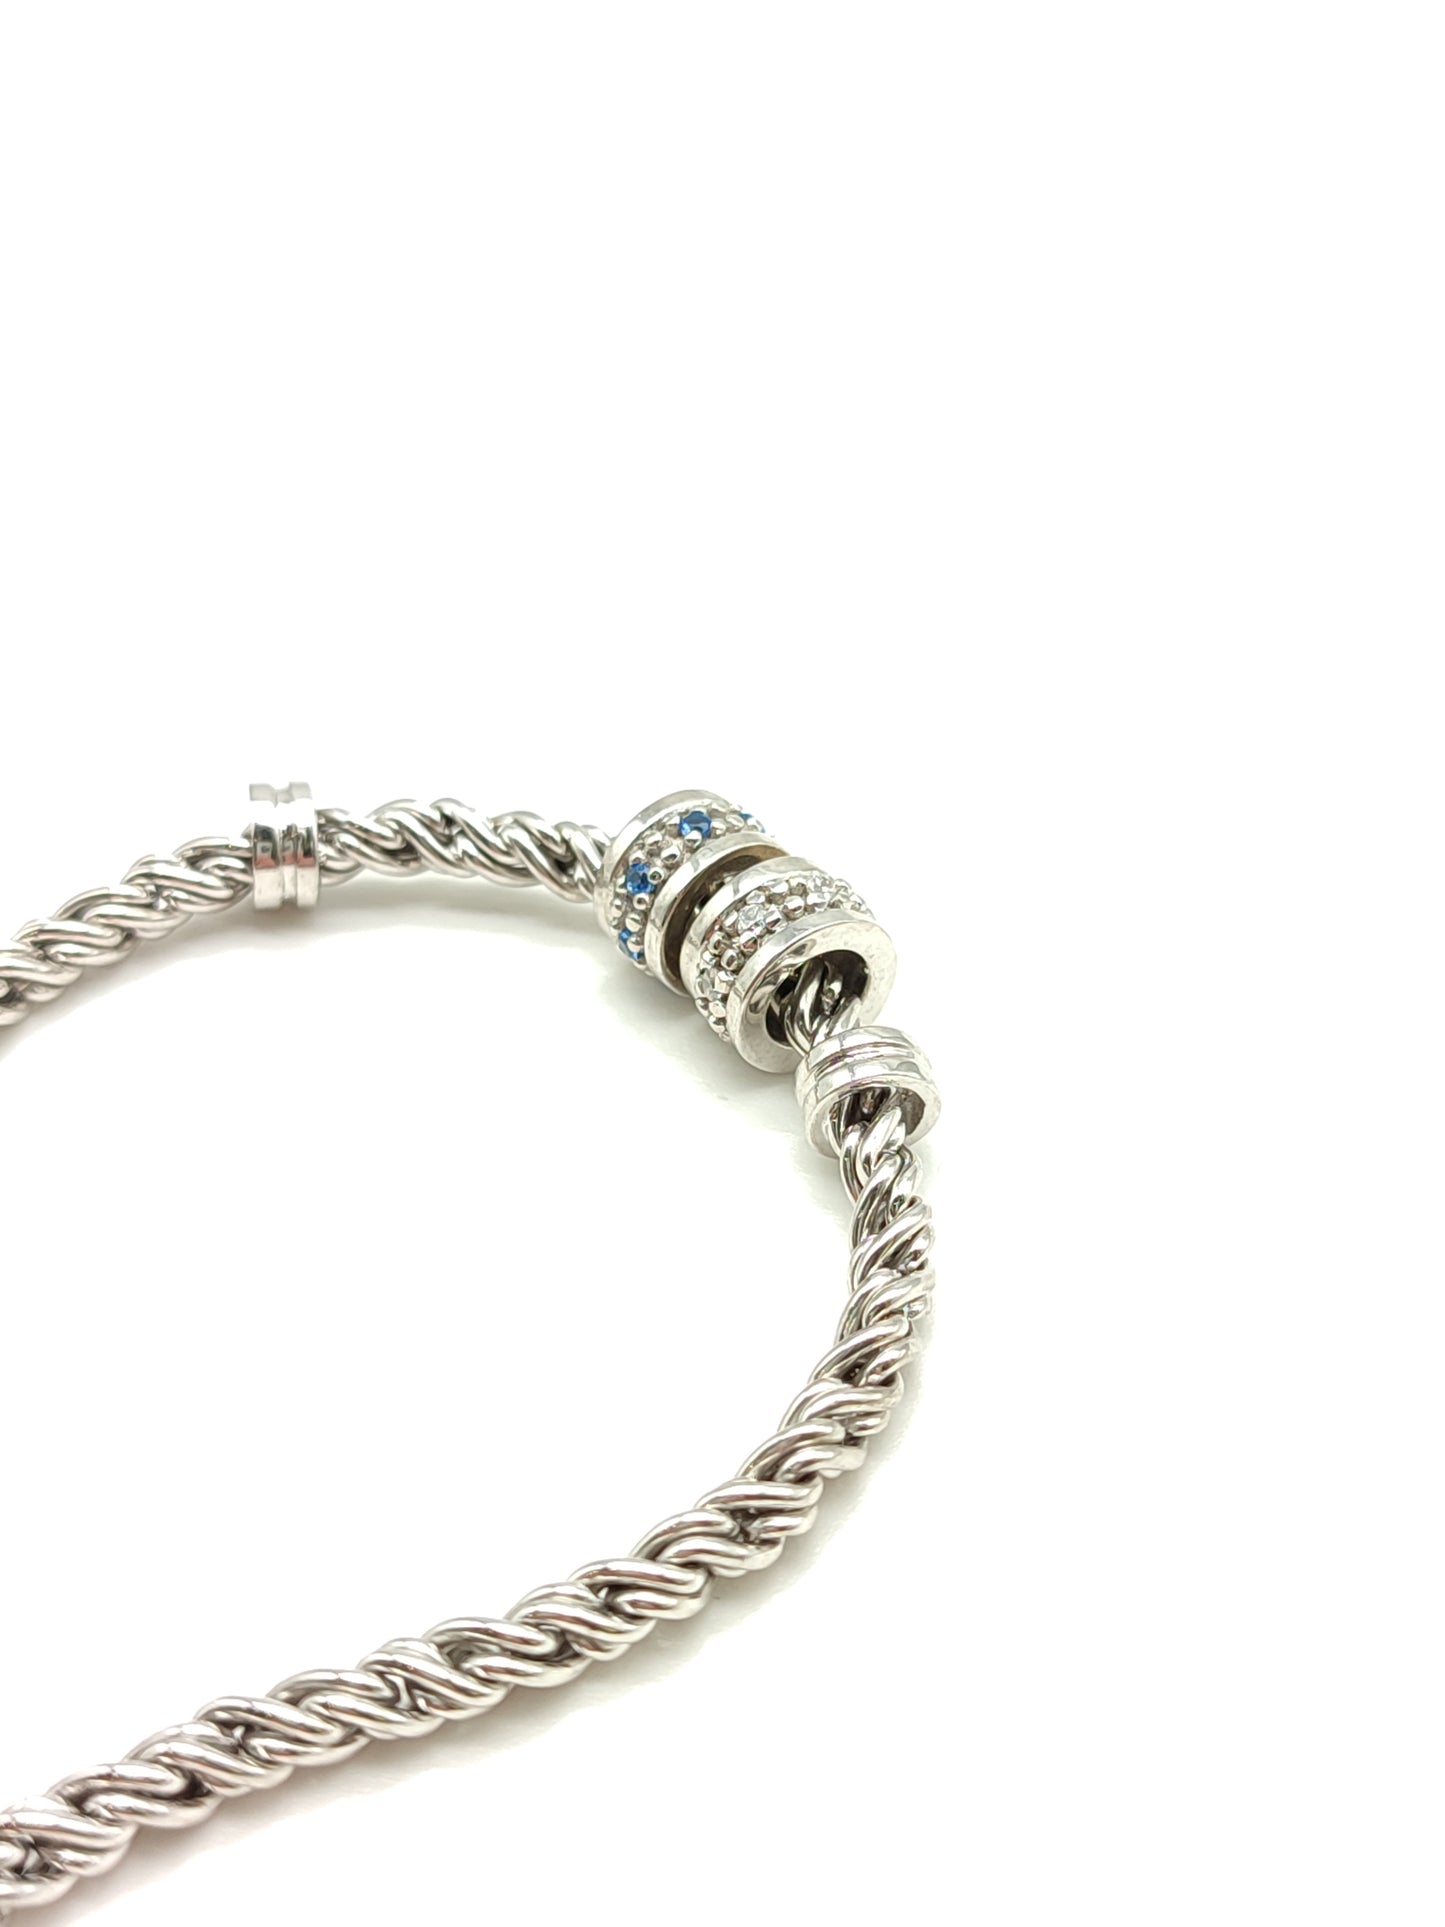 Silver bracelet with diamonds and sapphires